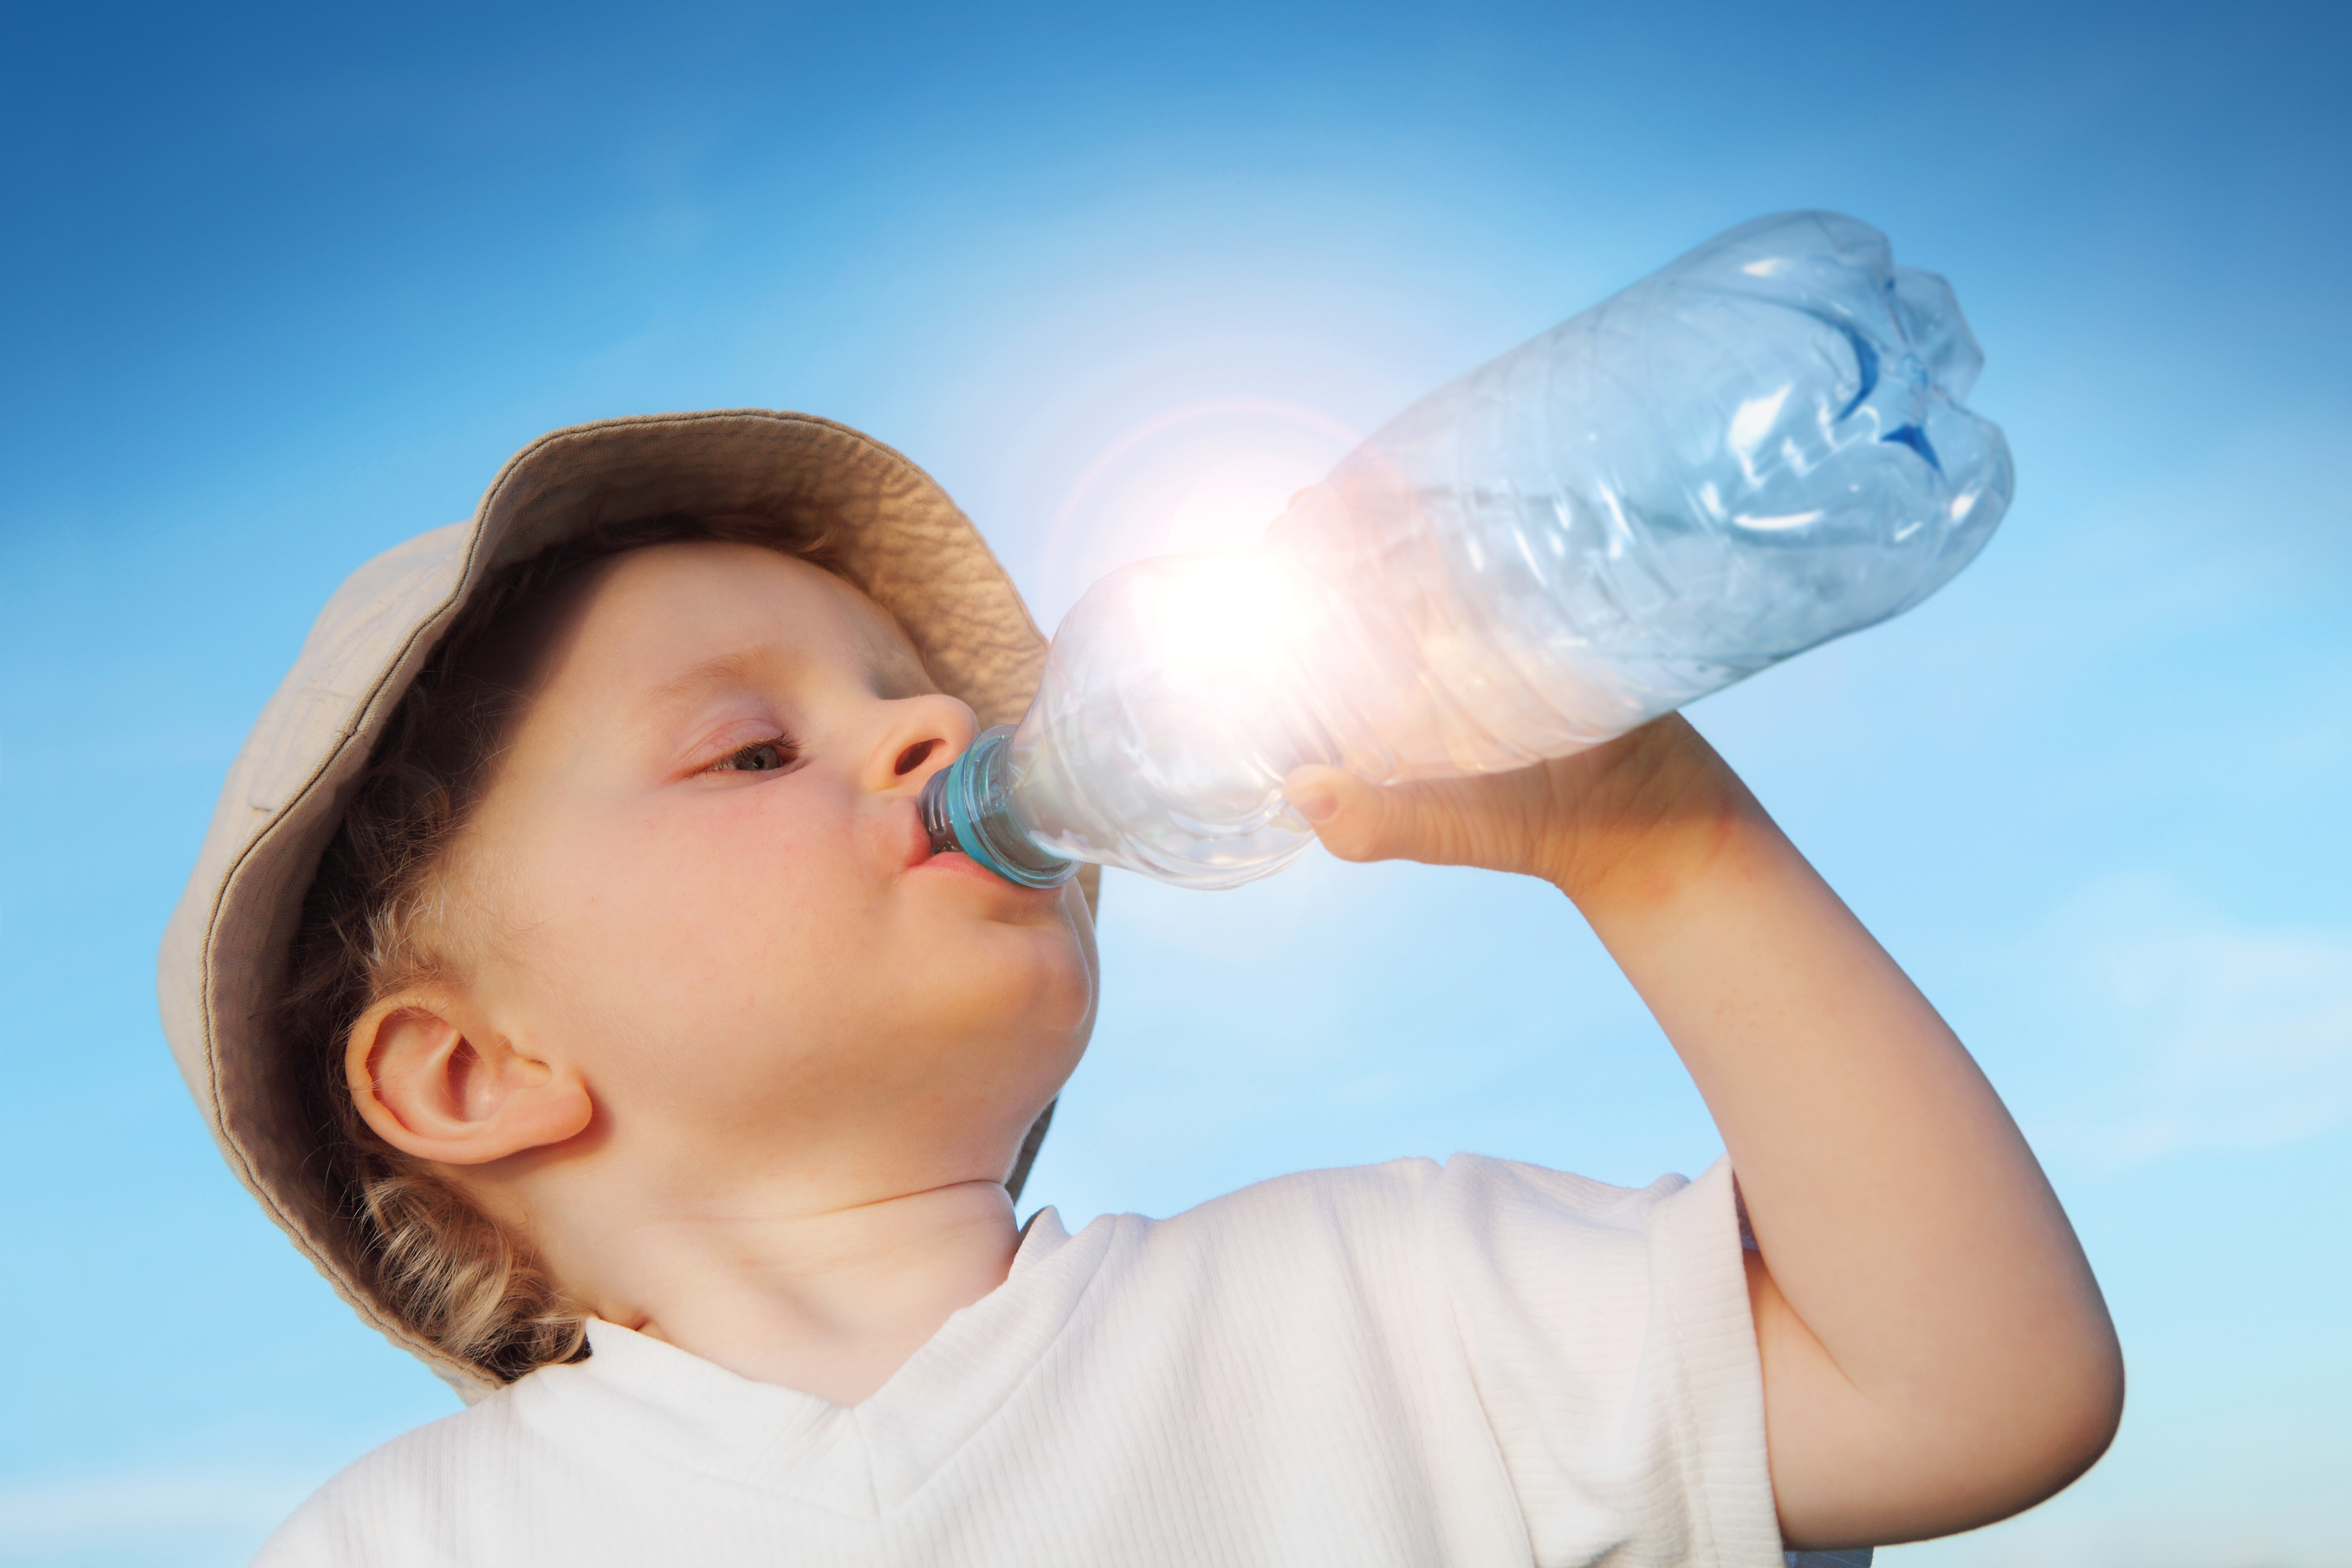 Boy with water bottle